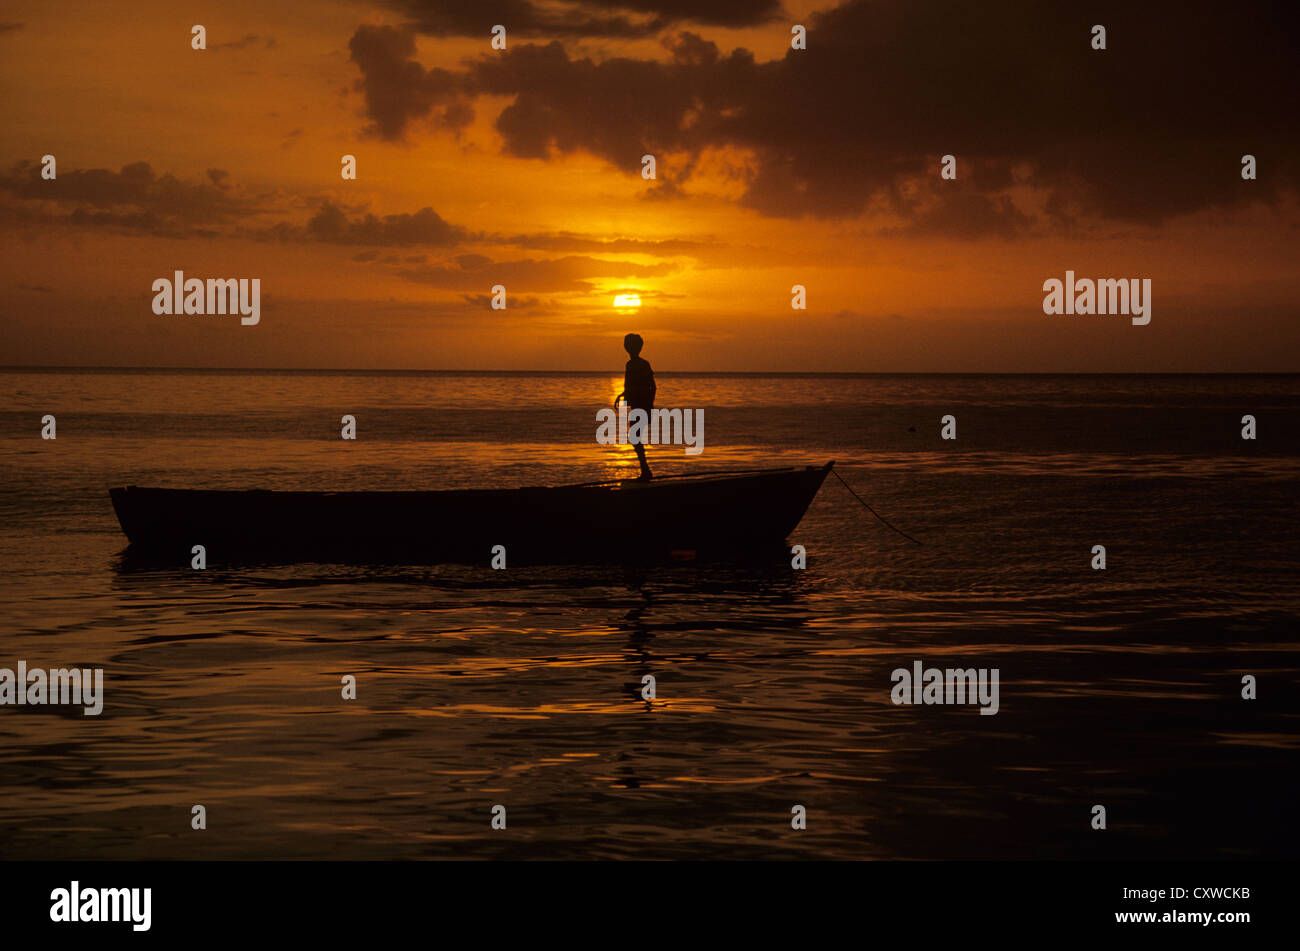 Fiji, sunset with boy on boat in silhouette. Stock Photo